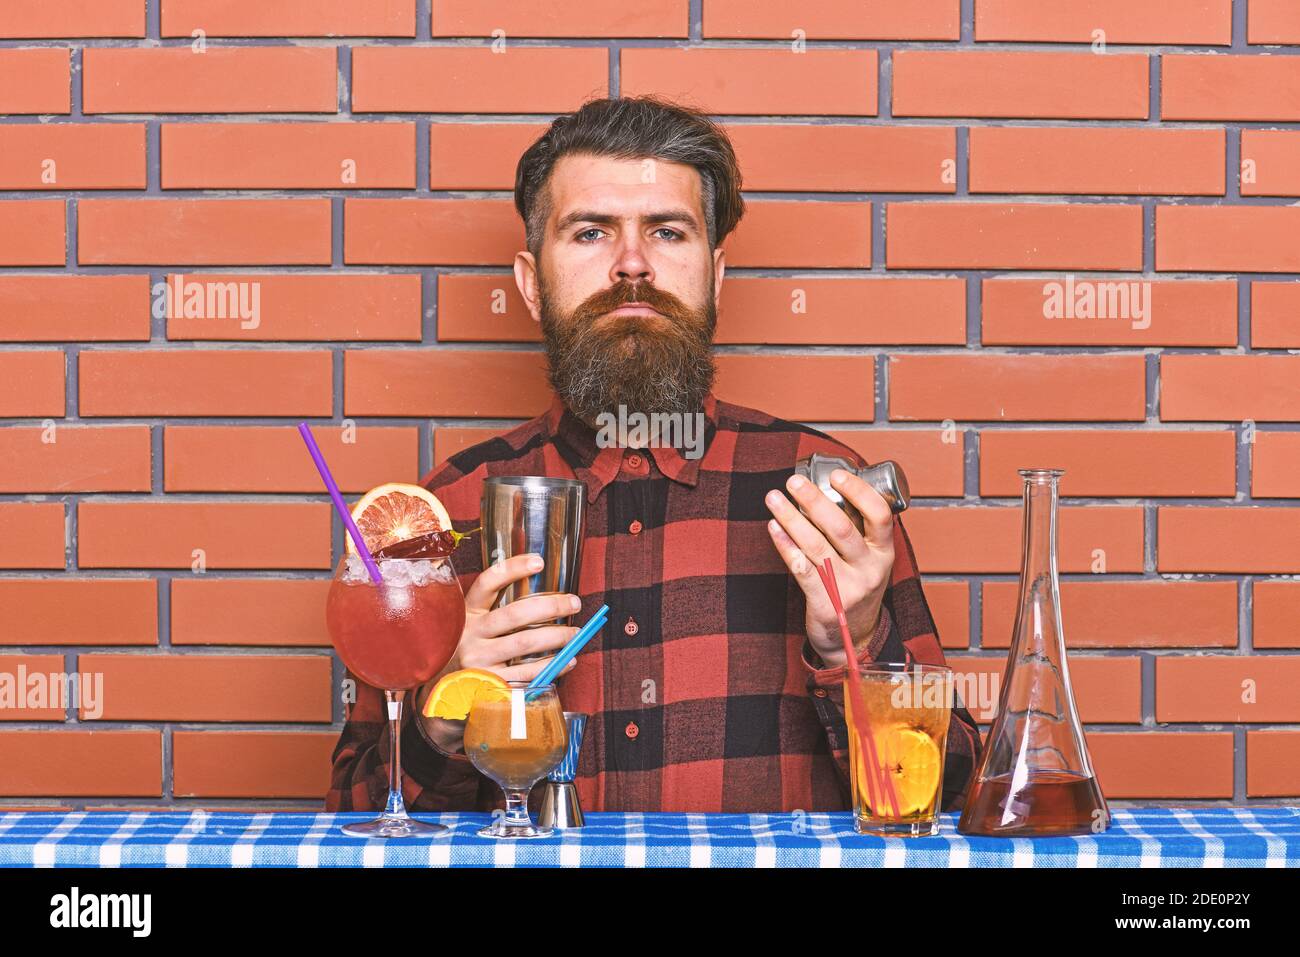 Alcoholic drinks concept. Barman with long beard and mustache and stylish hair on strict face holding shaker, makes alcoholic cocktail. Man in checkered shirt on brick wall background prepares drinks. Stock Photo